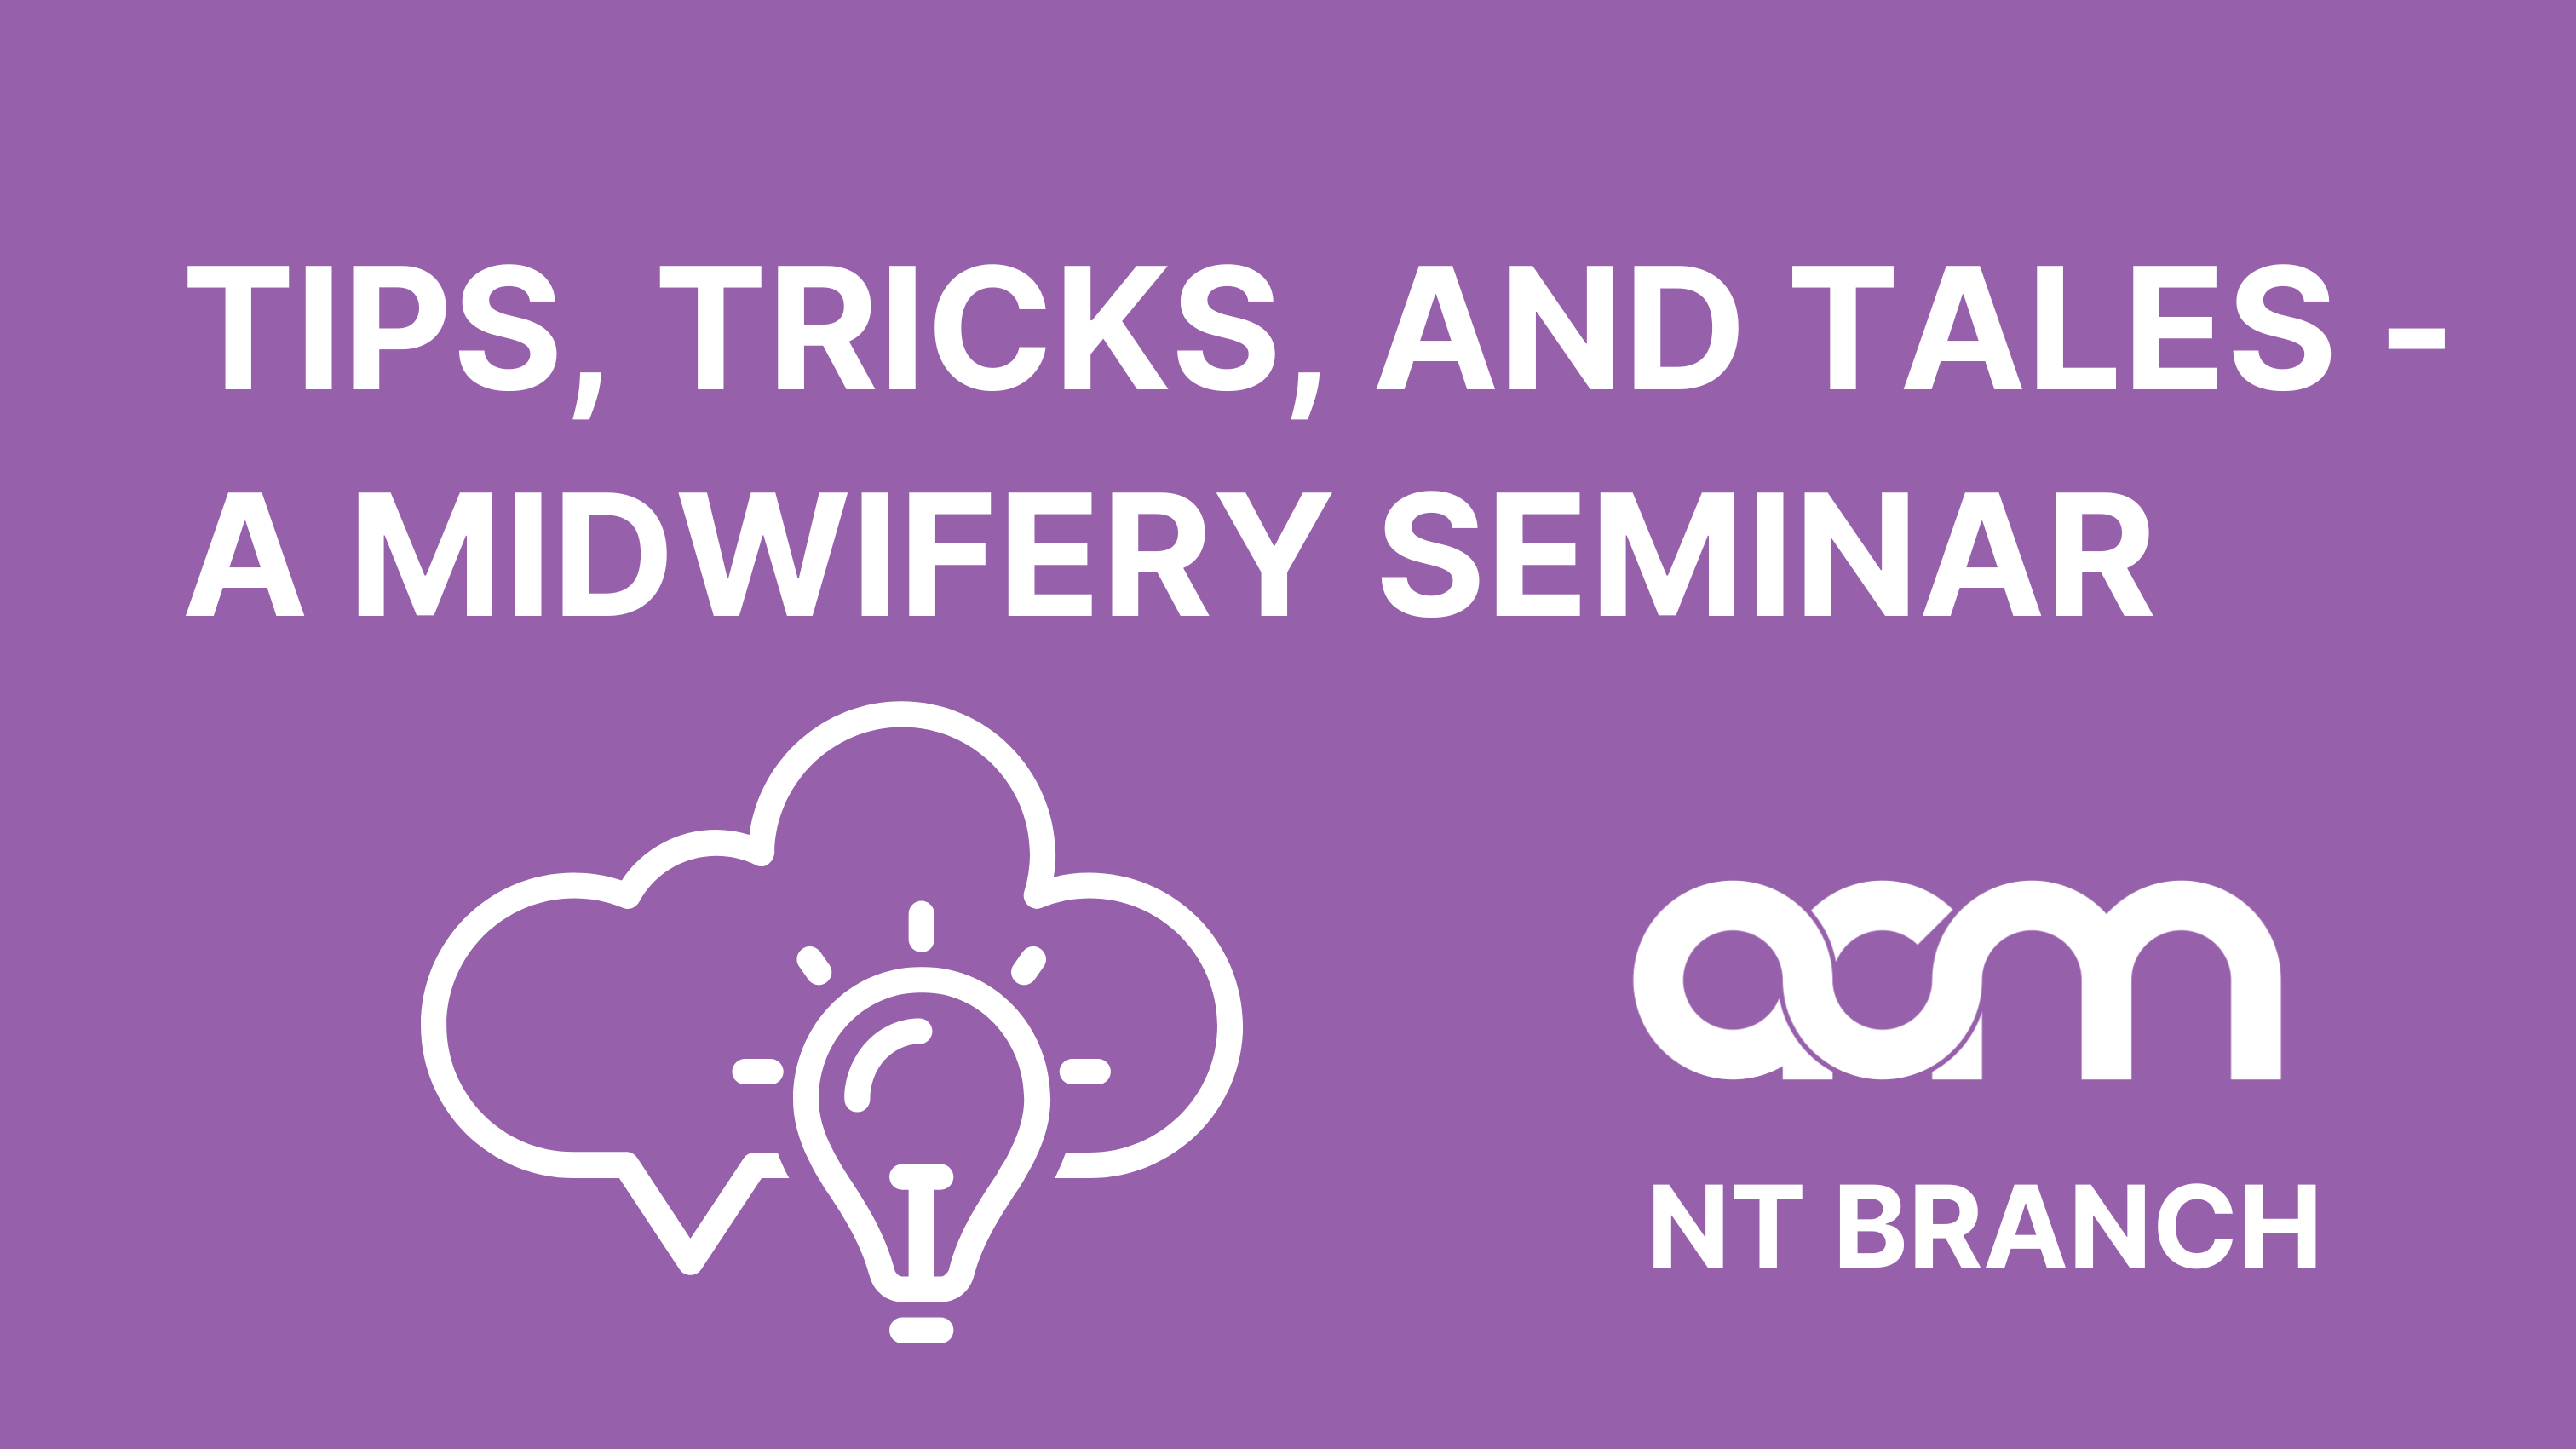 NT Branch - Tips, Tricks, and Tales - A Midwifery Seminar